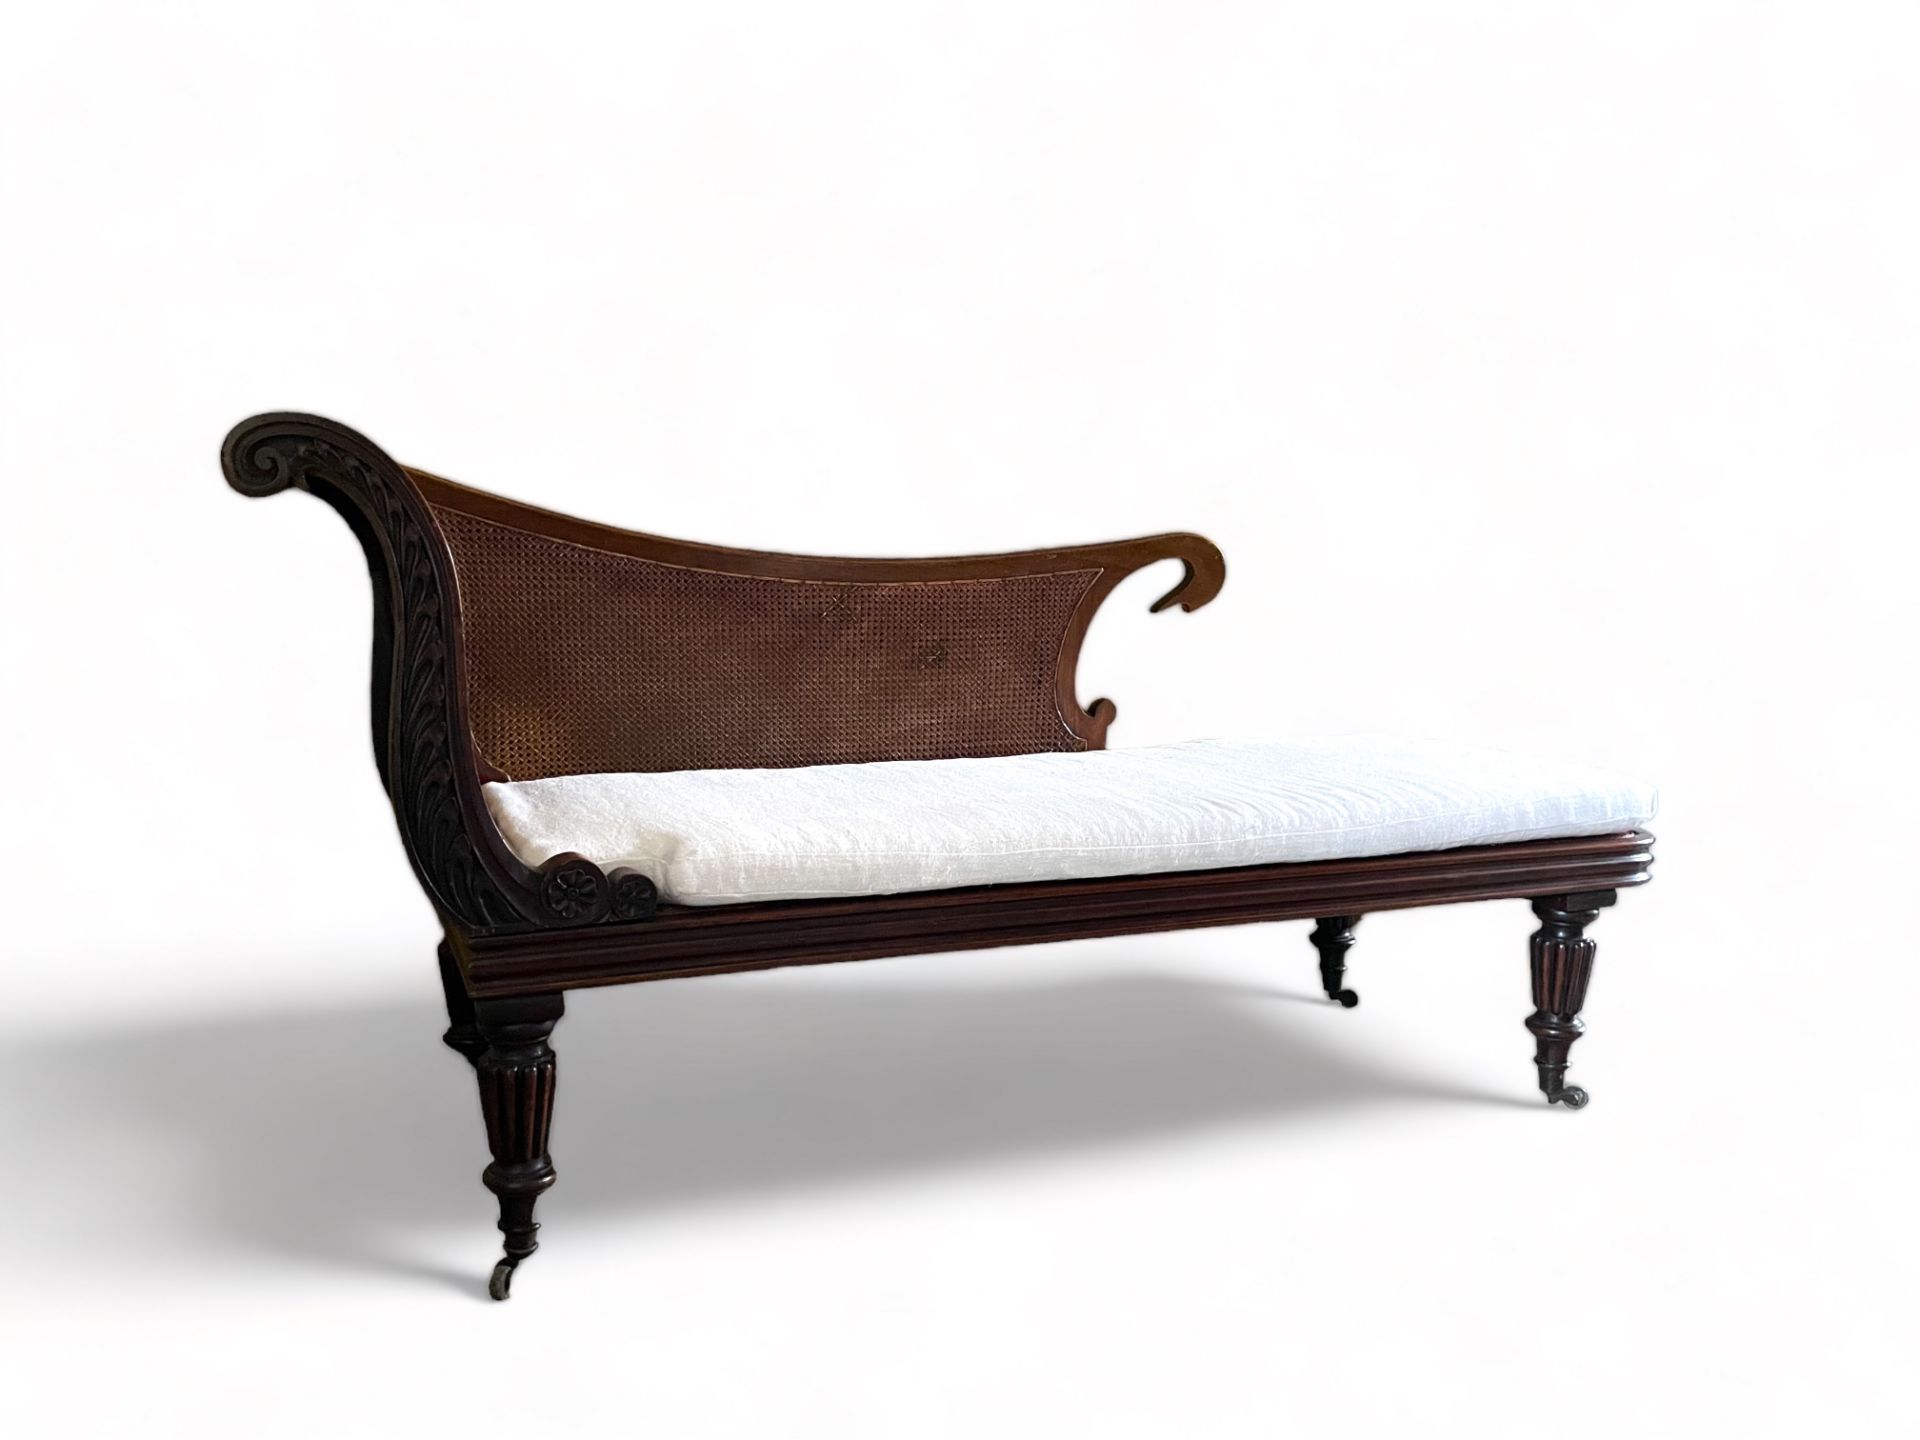 A19th century carved Colonial mahogany day bed